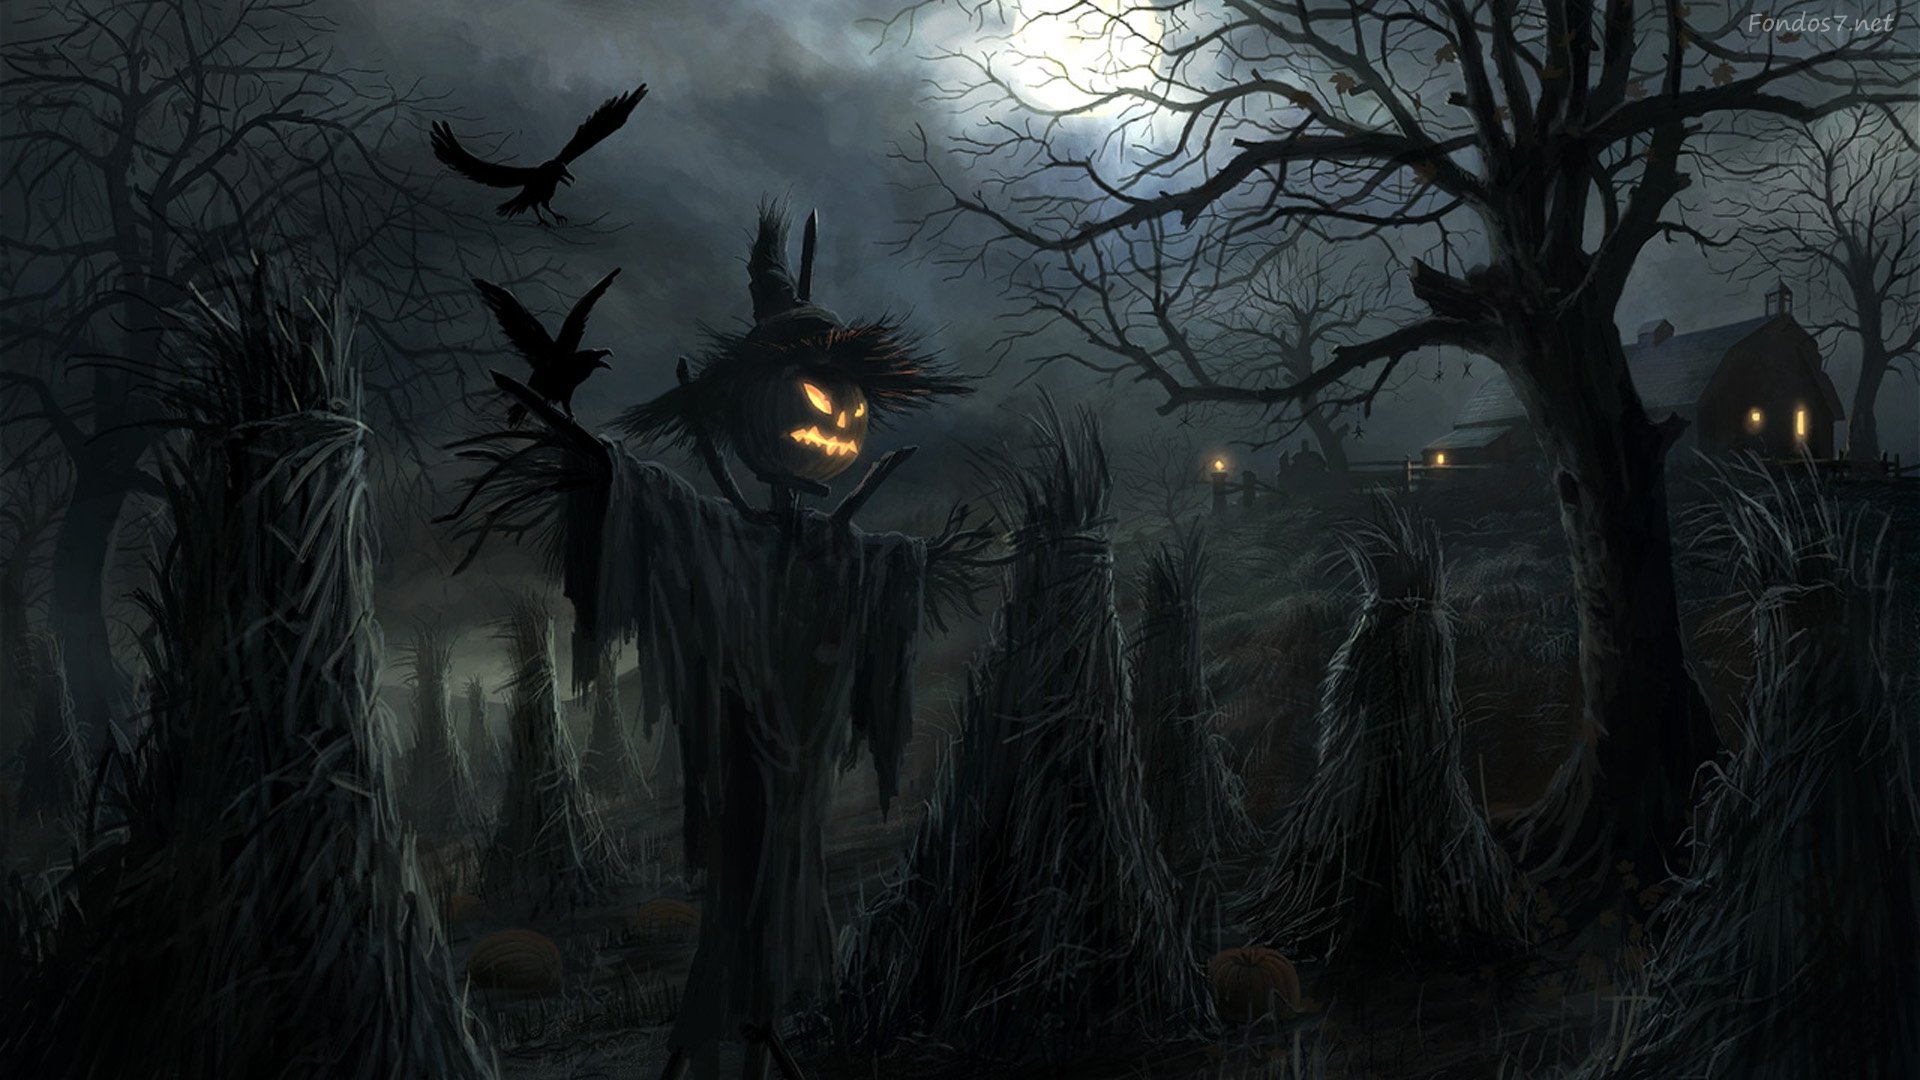 Halloween 2013 wallpaper collection The Windows Site for 1920x1080